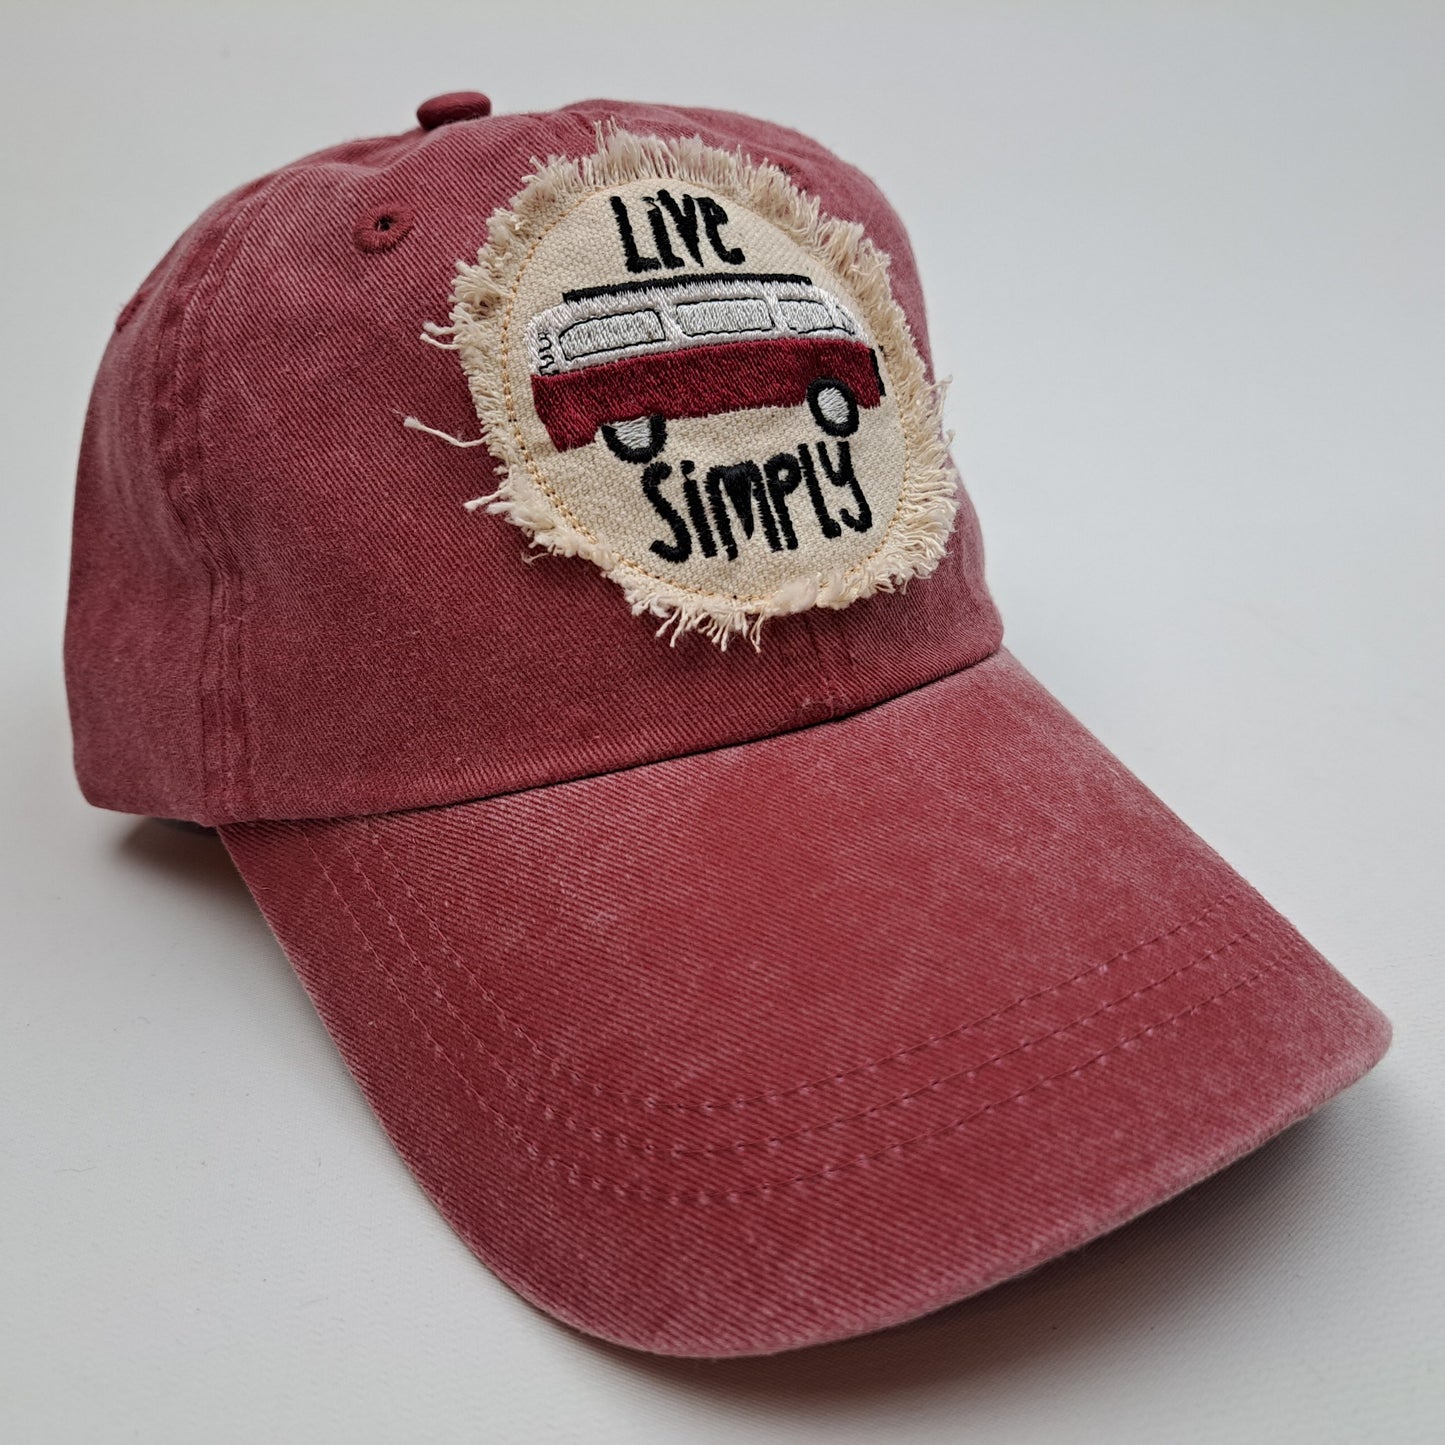 VW Bus Live Simply Embroidered Frayed Patch Women's Hat Cap Washed Relaxed Cotton Adjustabl